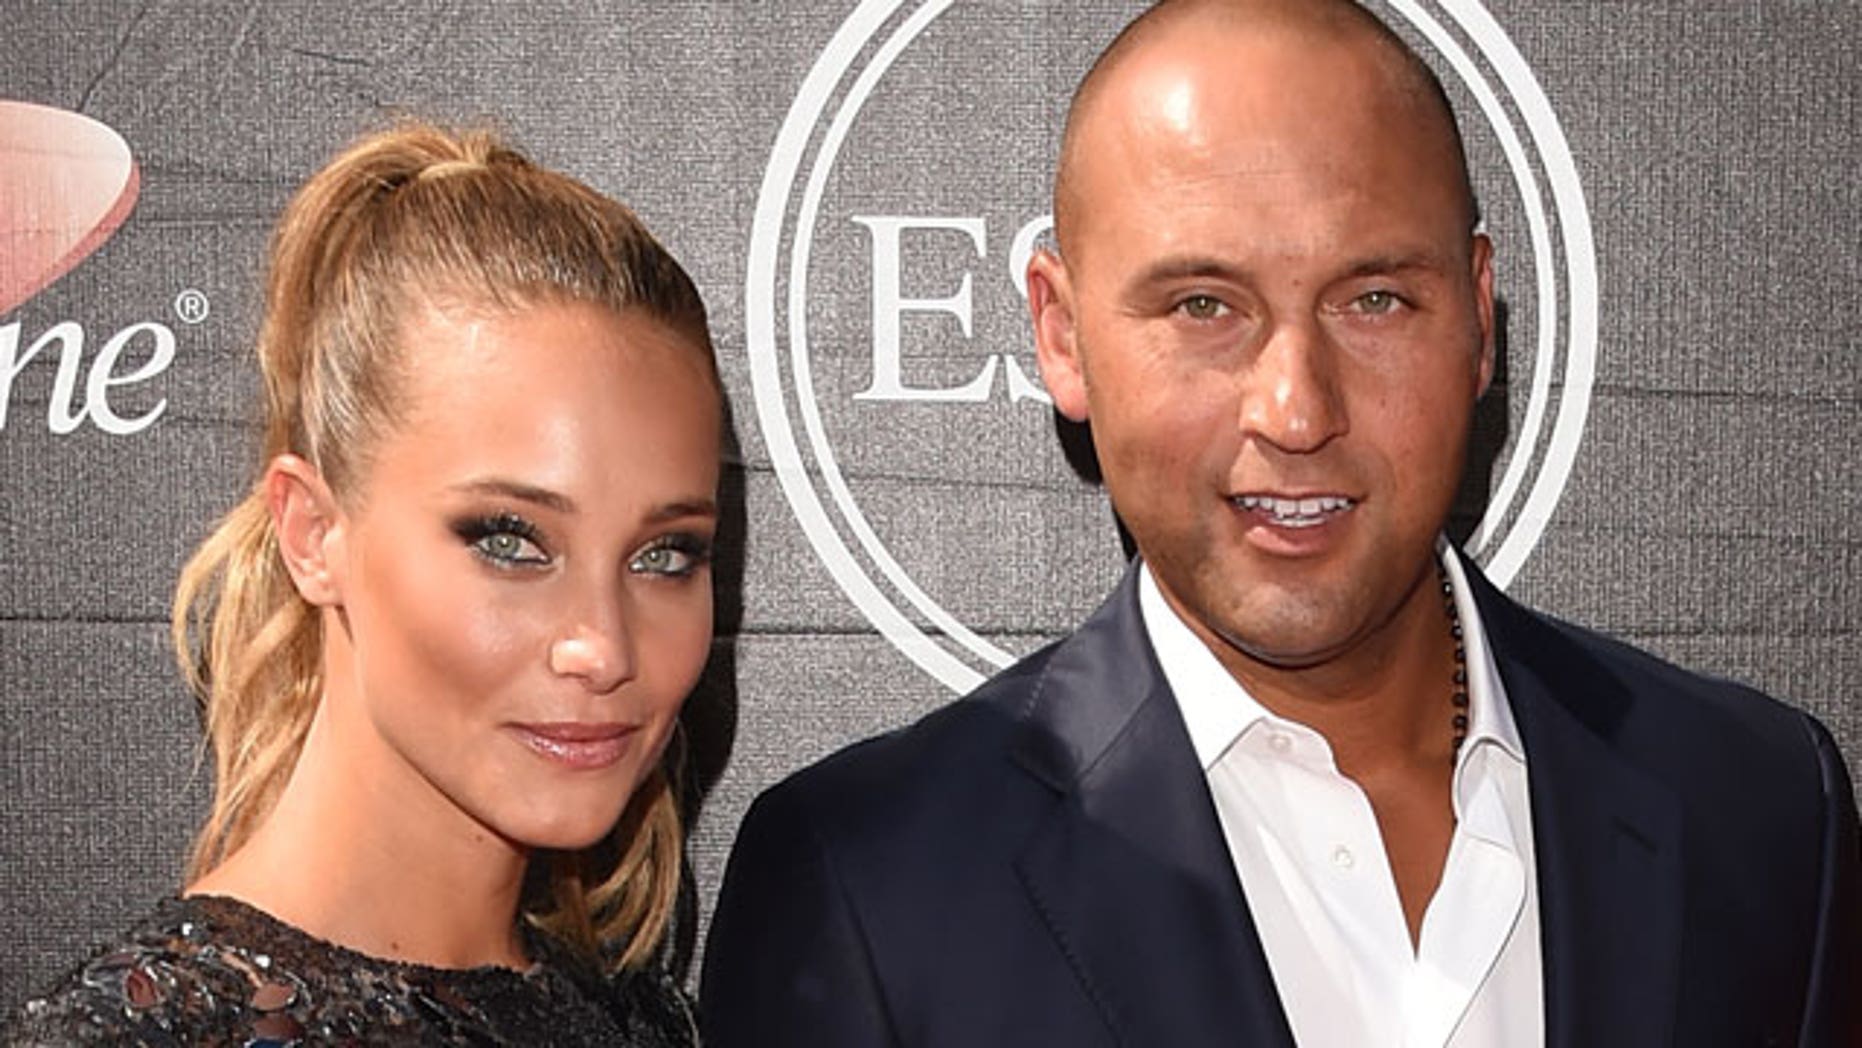 Derek Jeter's wife Hannah Davis shows off baby bump while out with her husband | Fox News